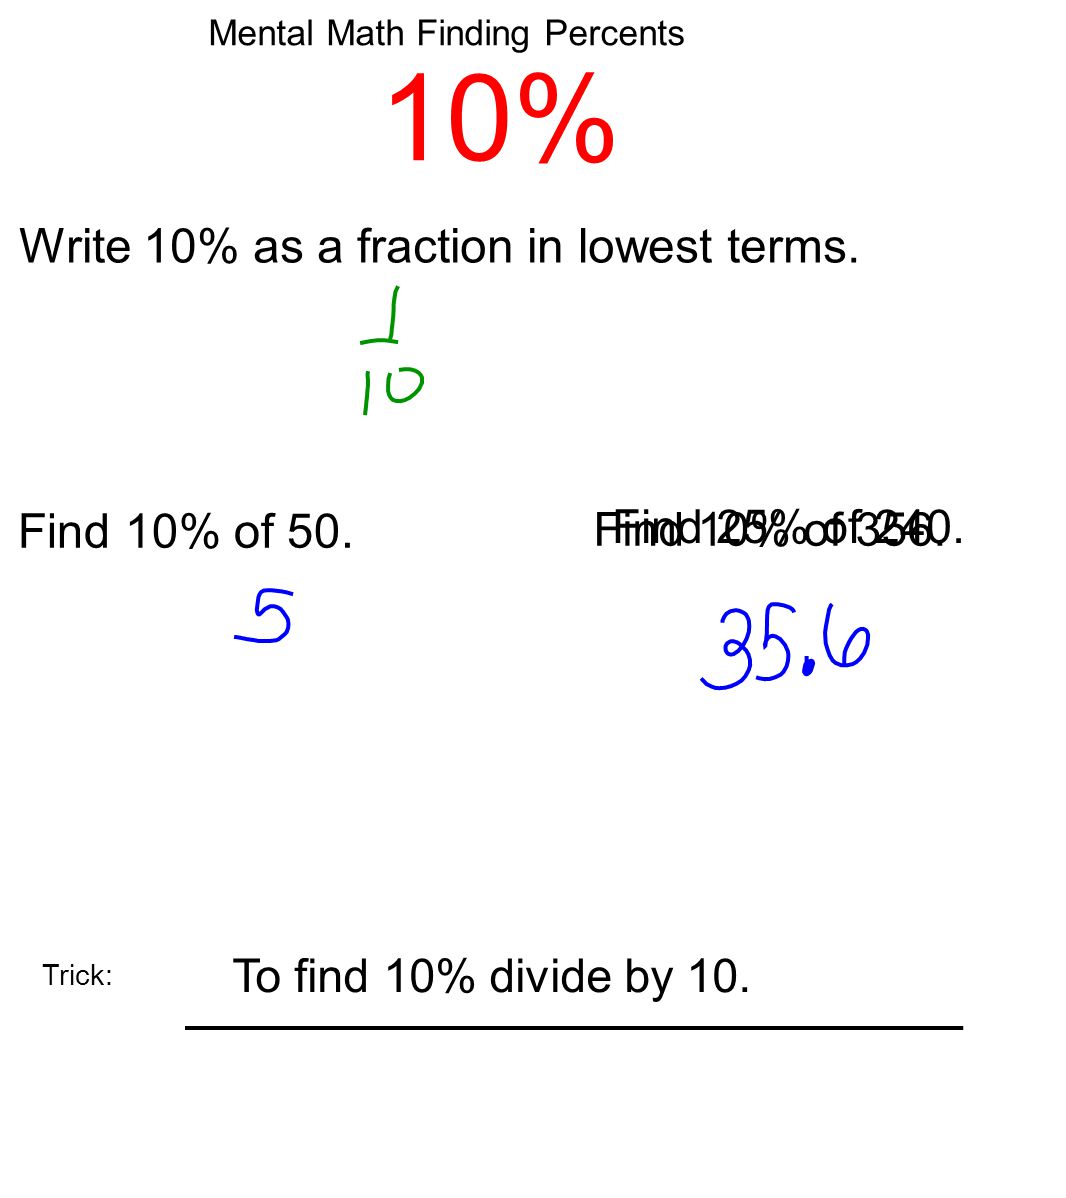 Mental Math Finding Percents 10% Write 10% as a fraction in lowest terms.